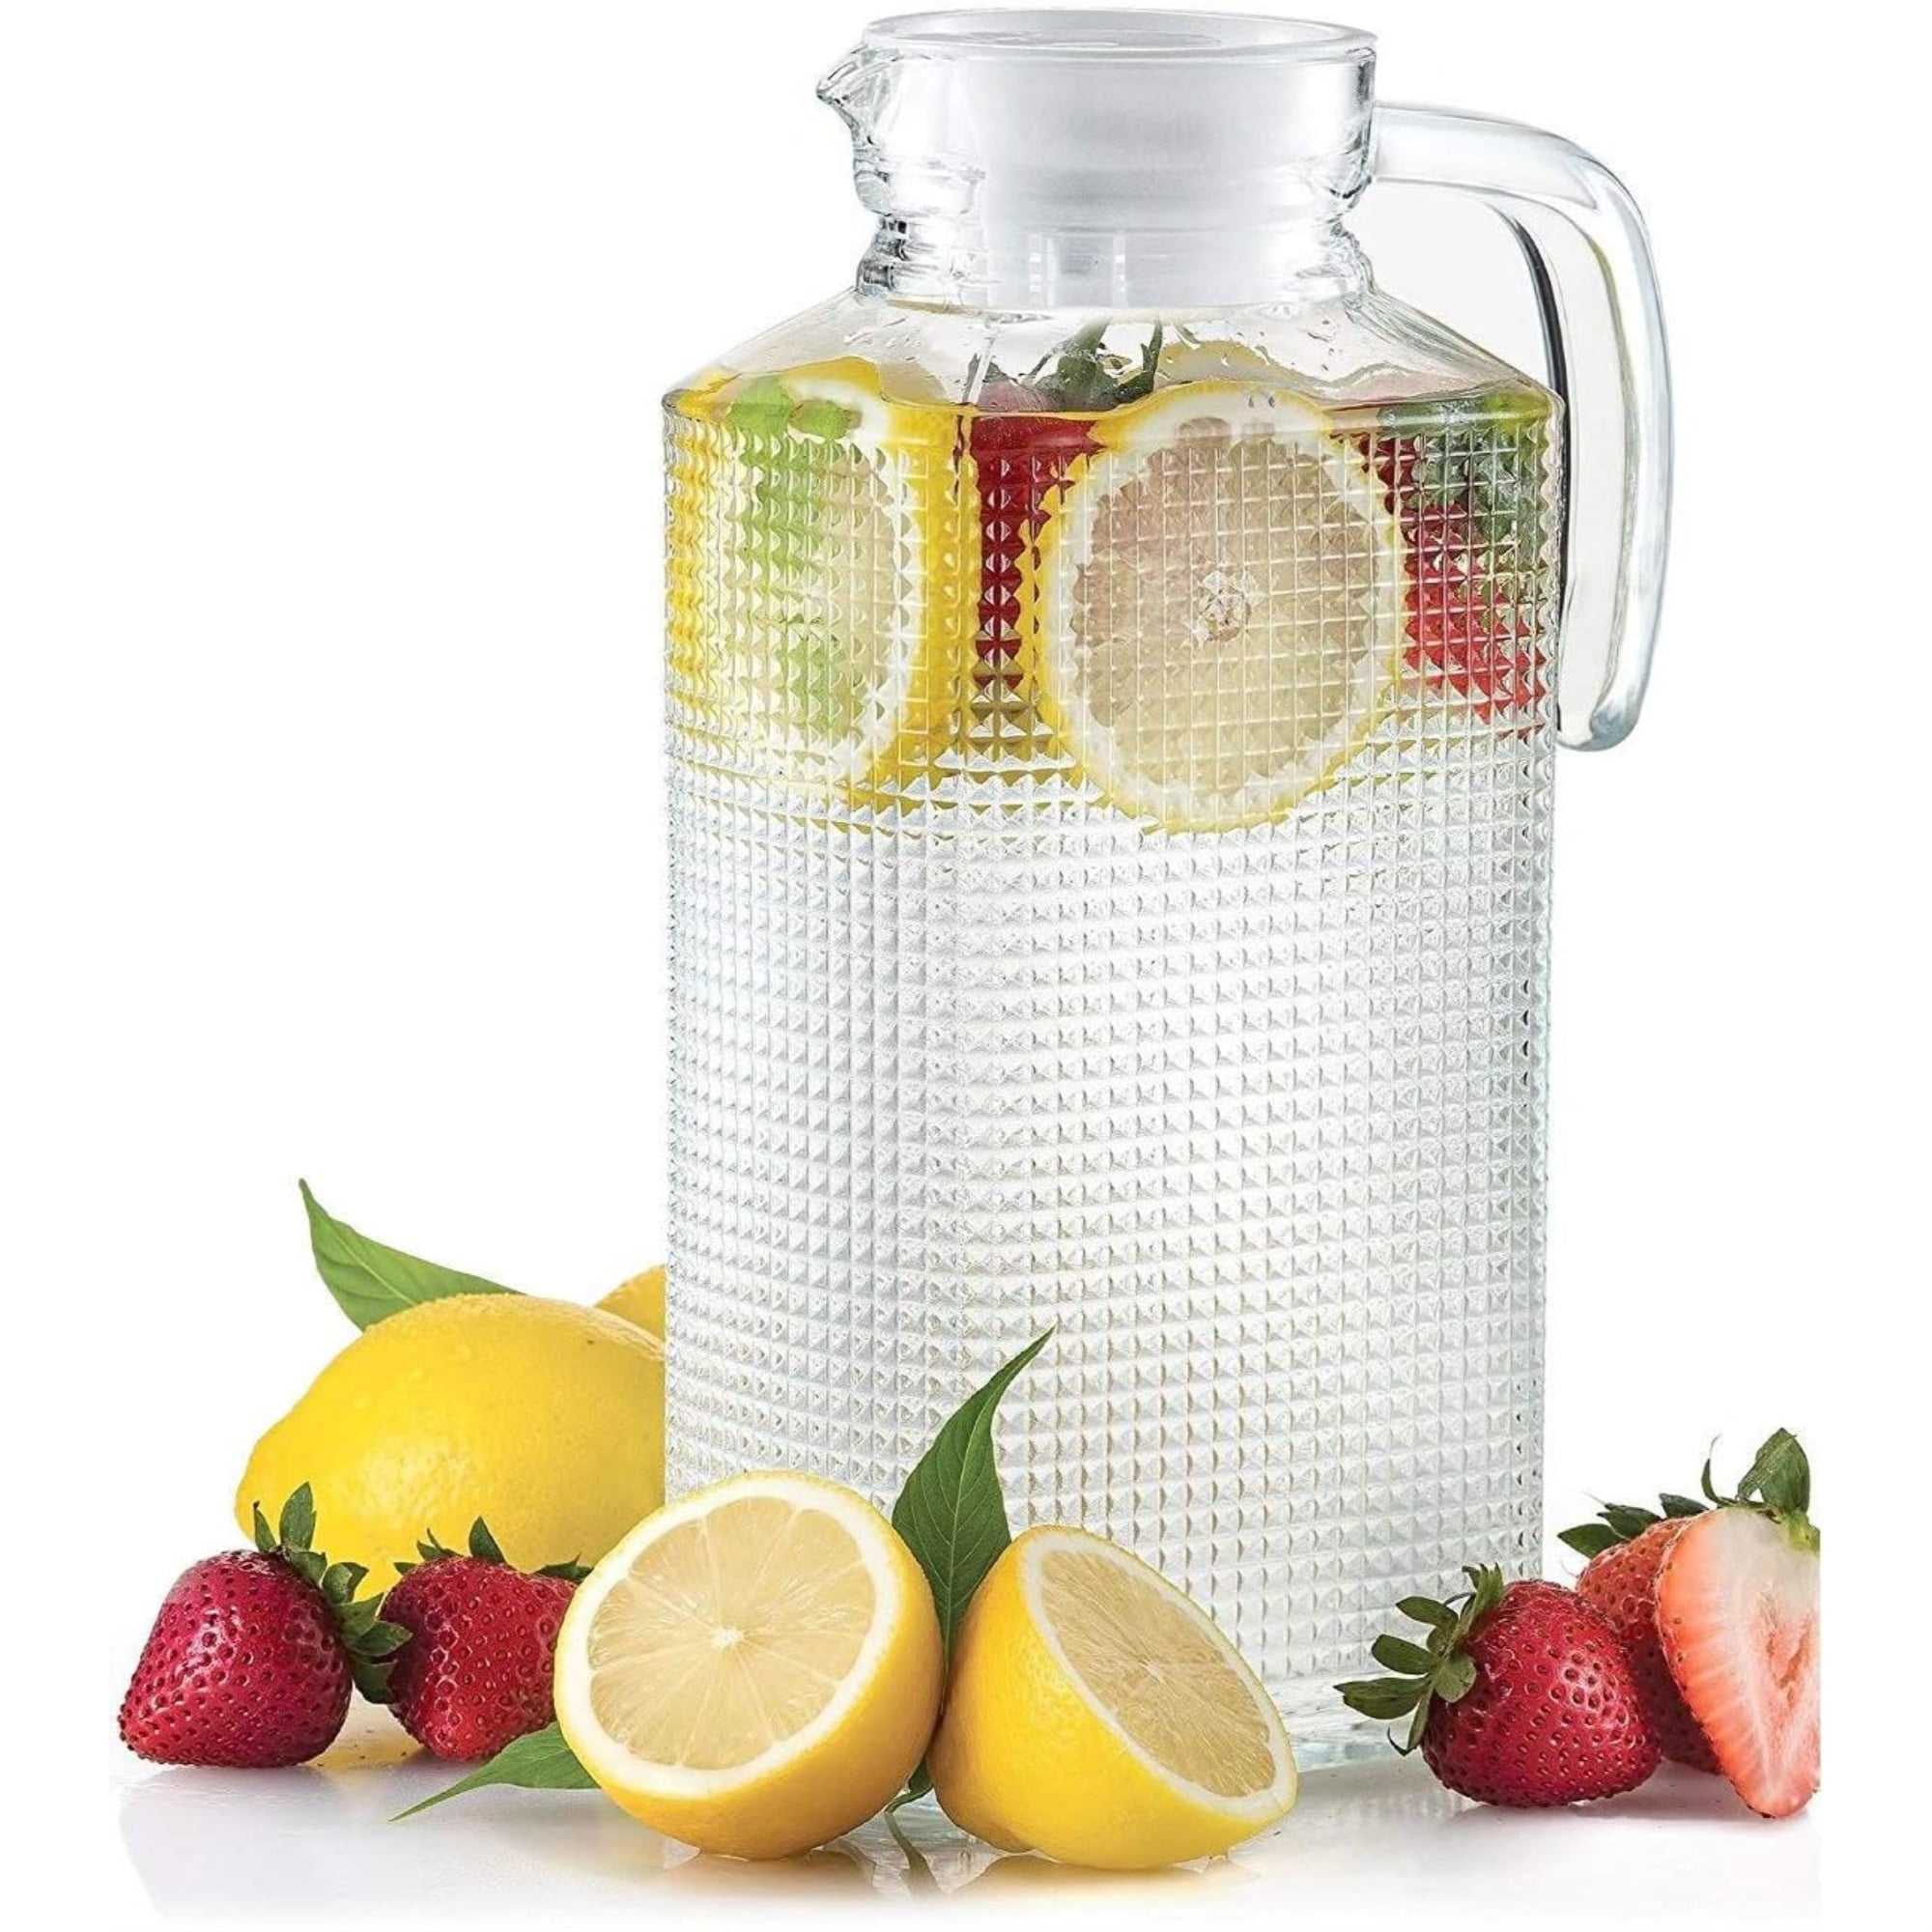 Picture of Circleware 92032 Circleware Frigo set of 2 63.4oz.Textured pitcher with plastic lid